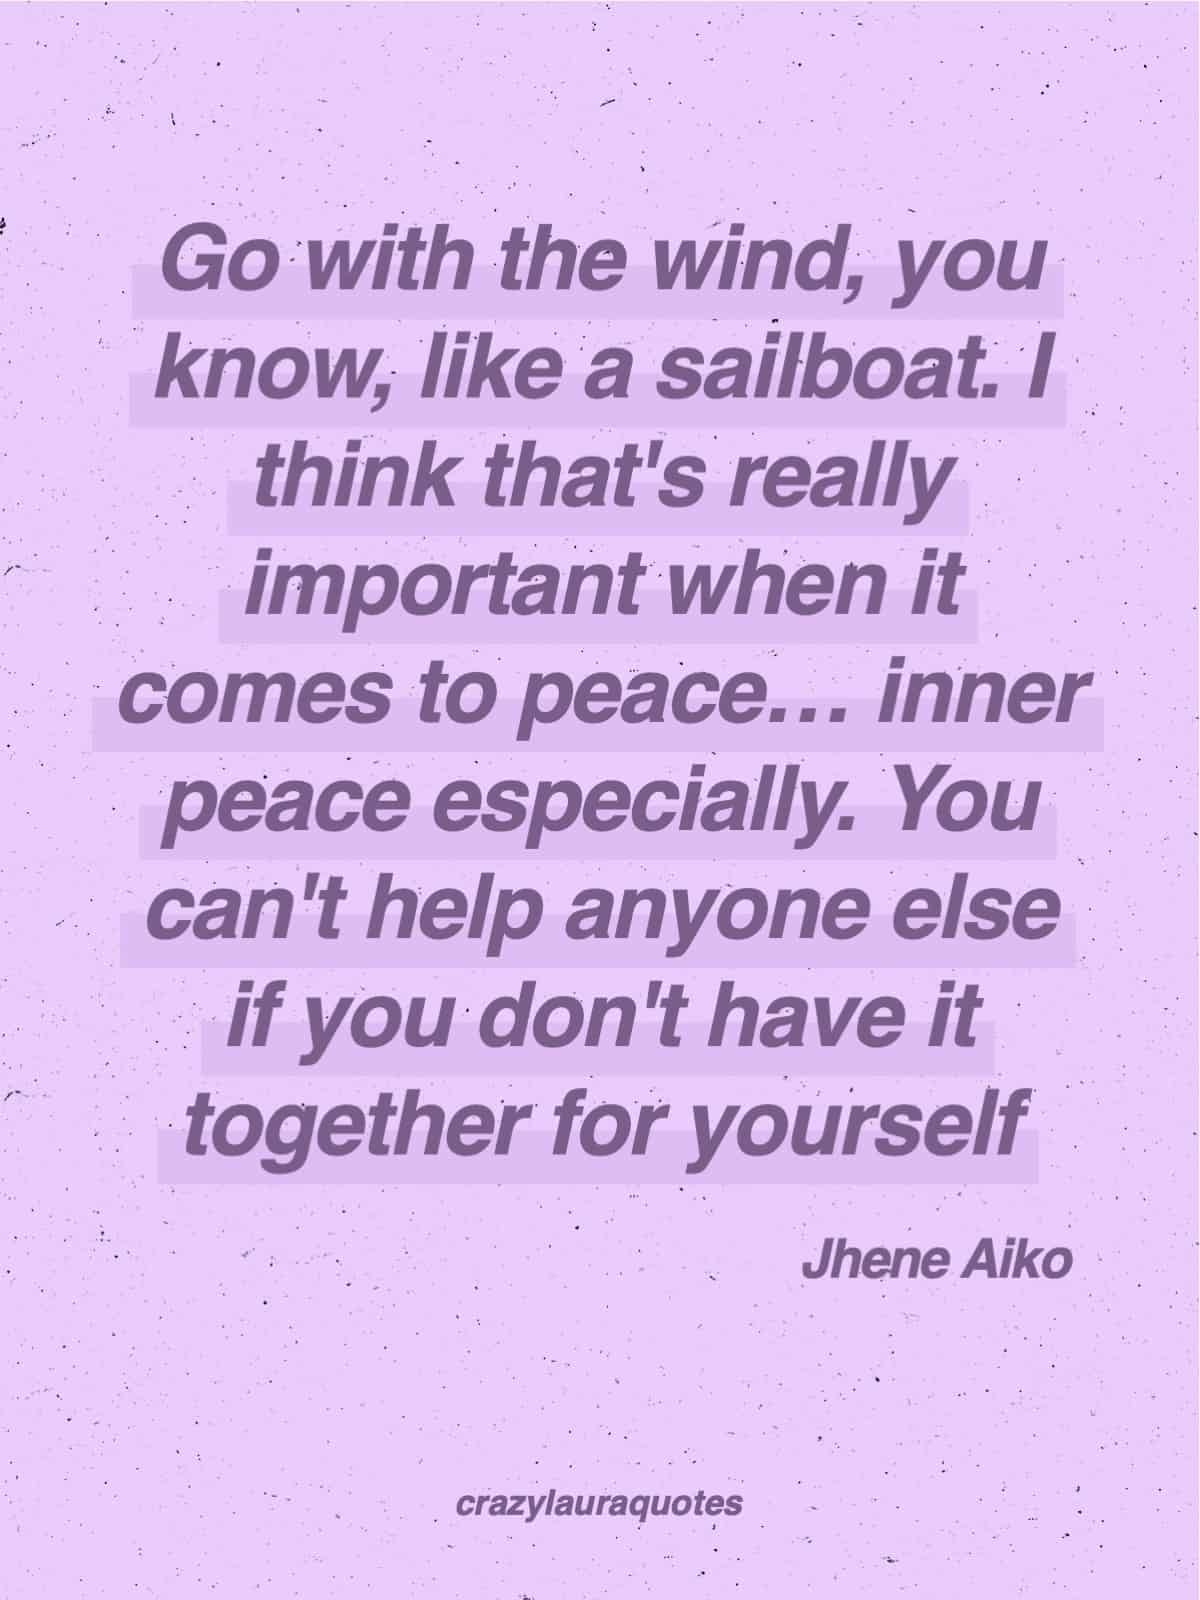 jhene aiko saying about self care